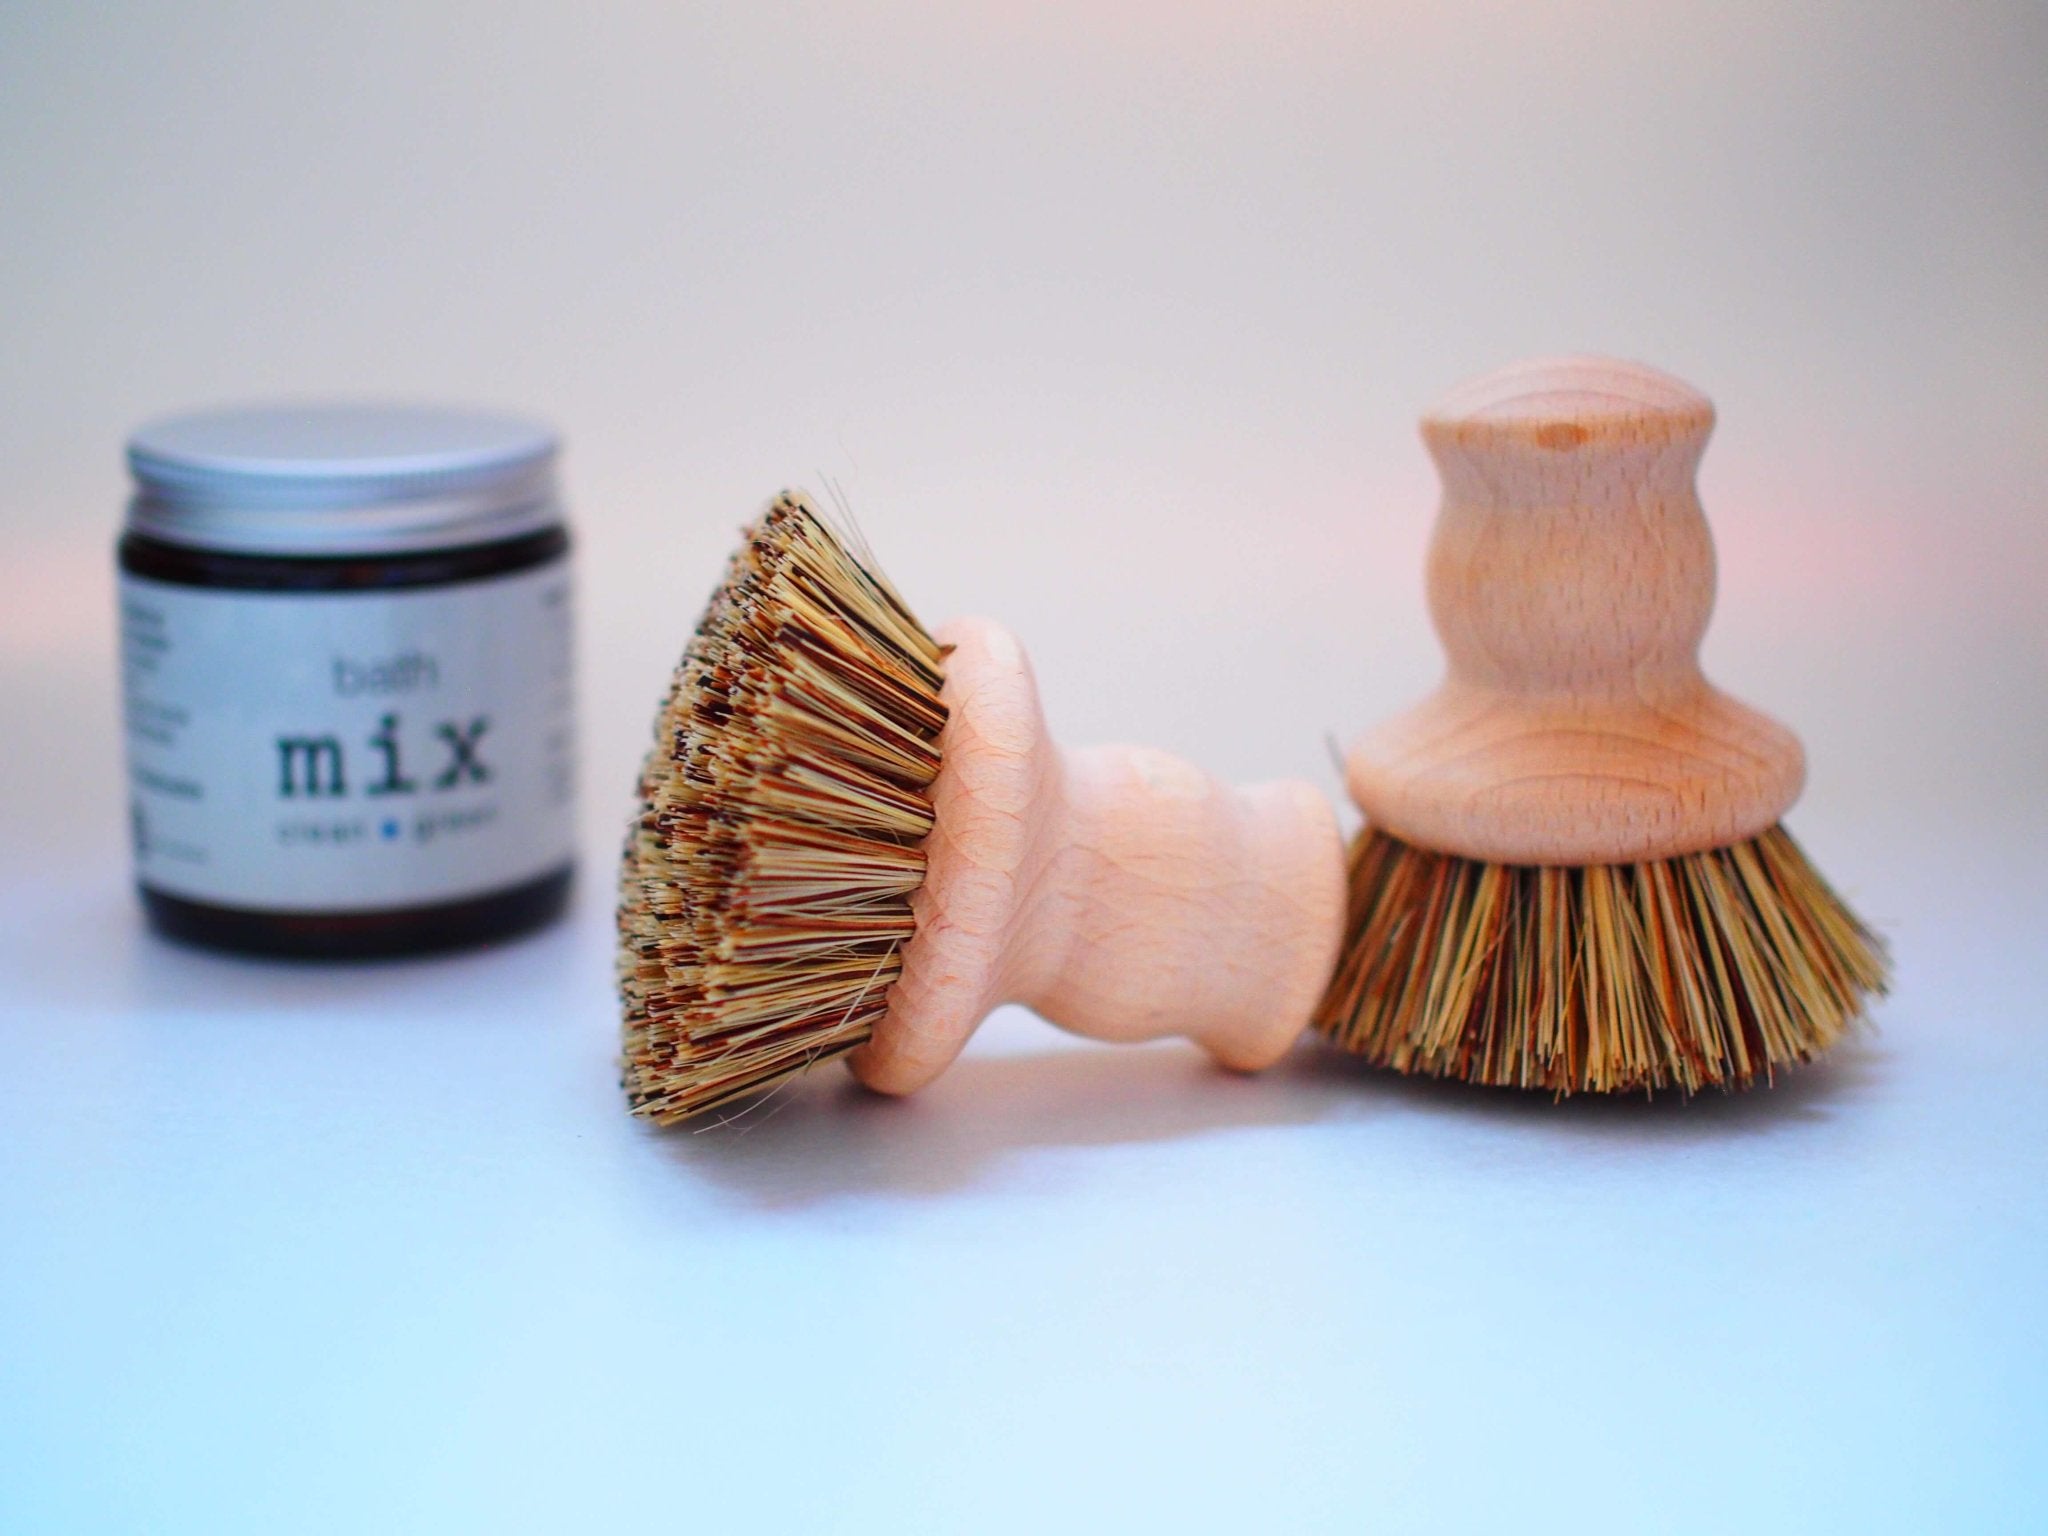 Ecoliving Wooden Dish Brush | Long Handle